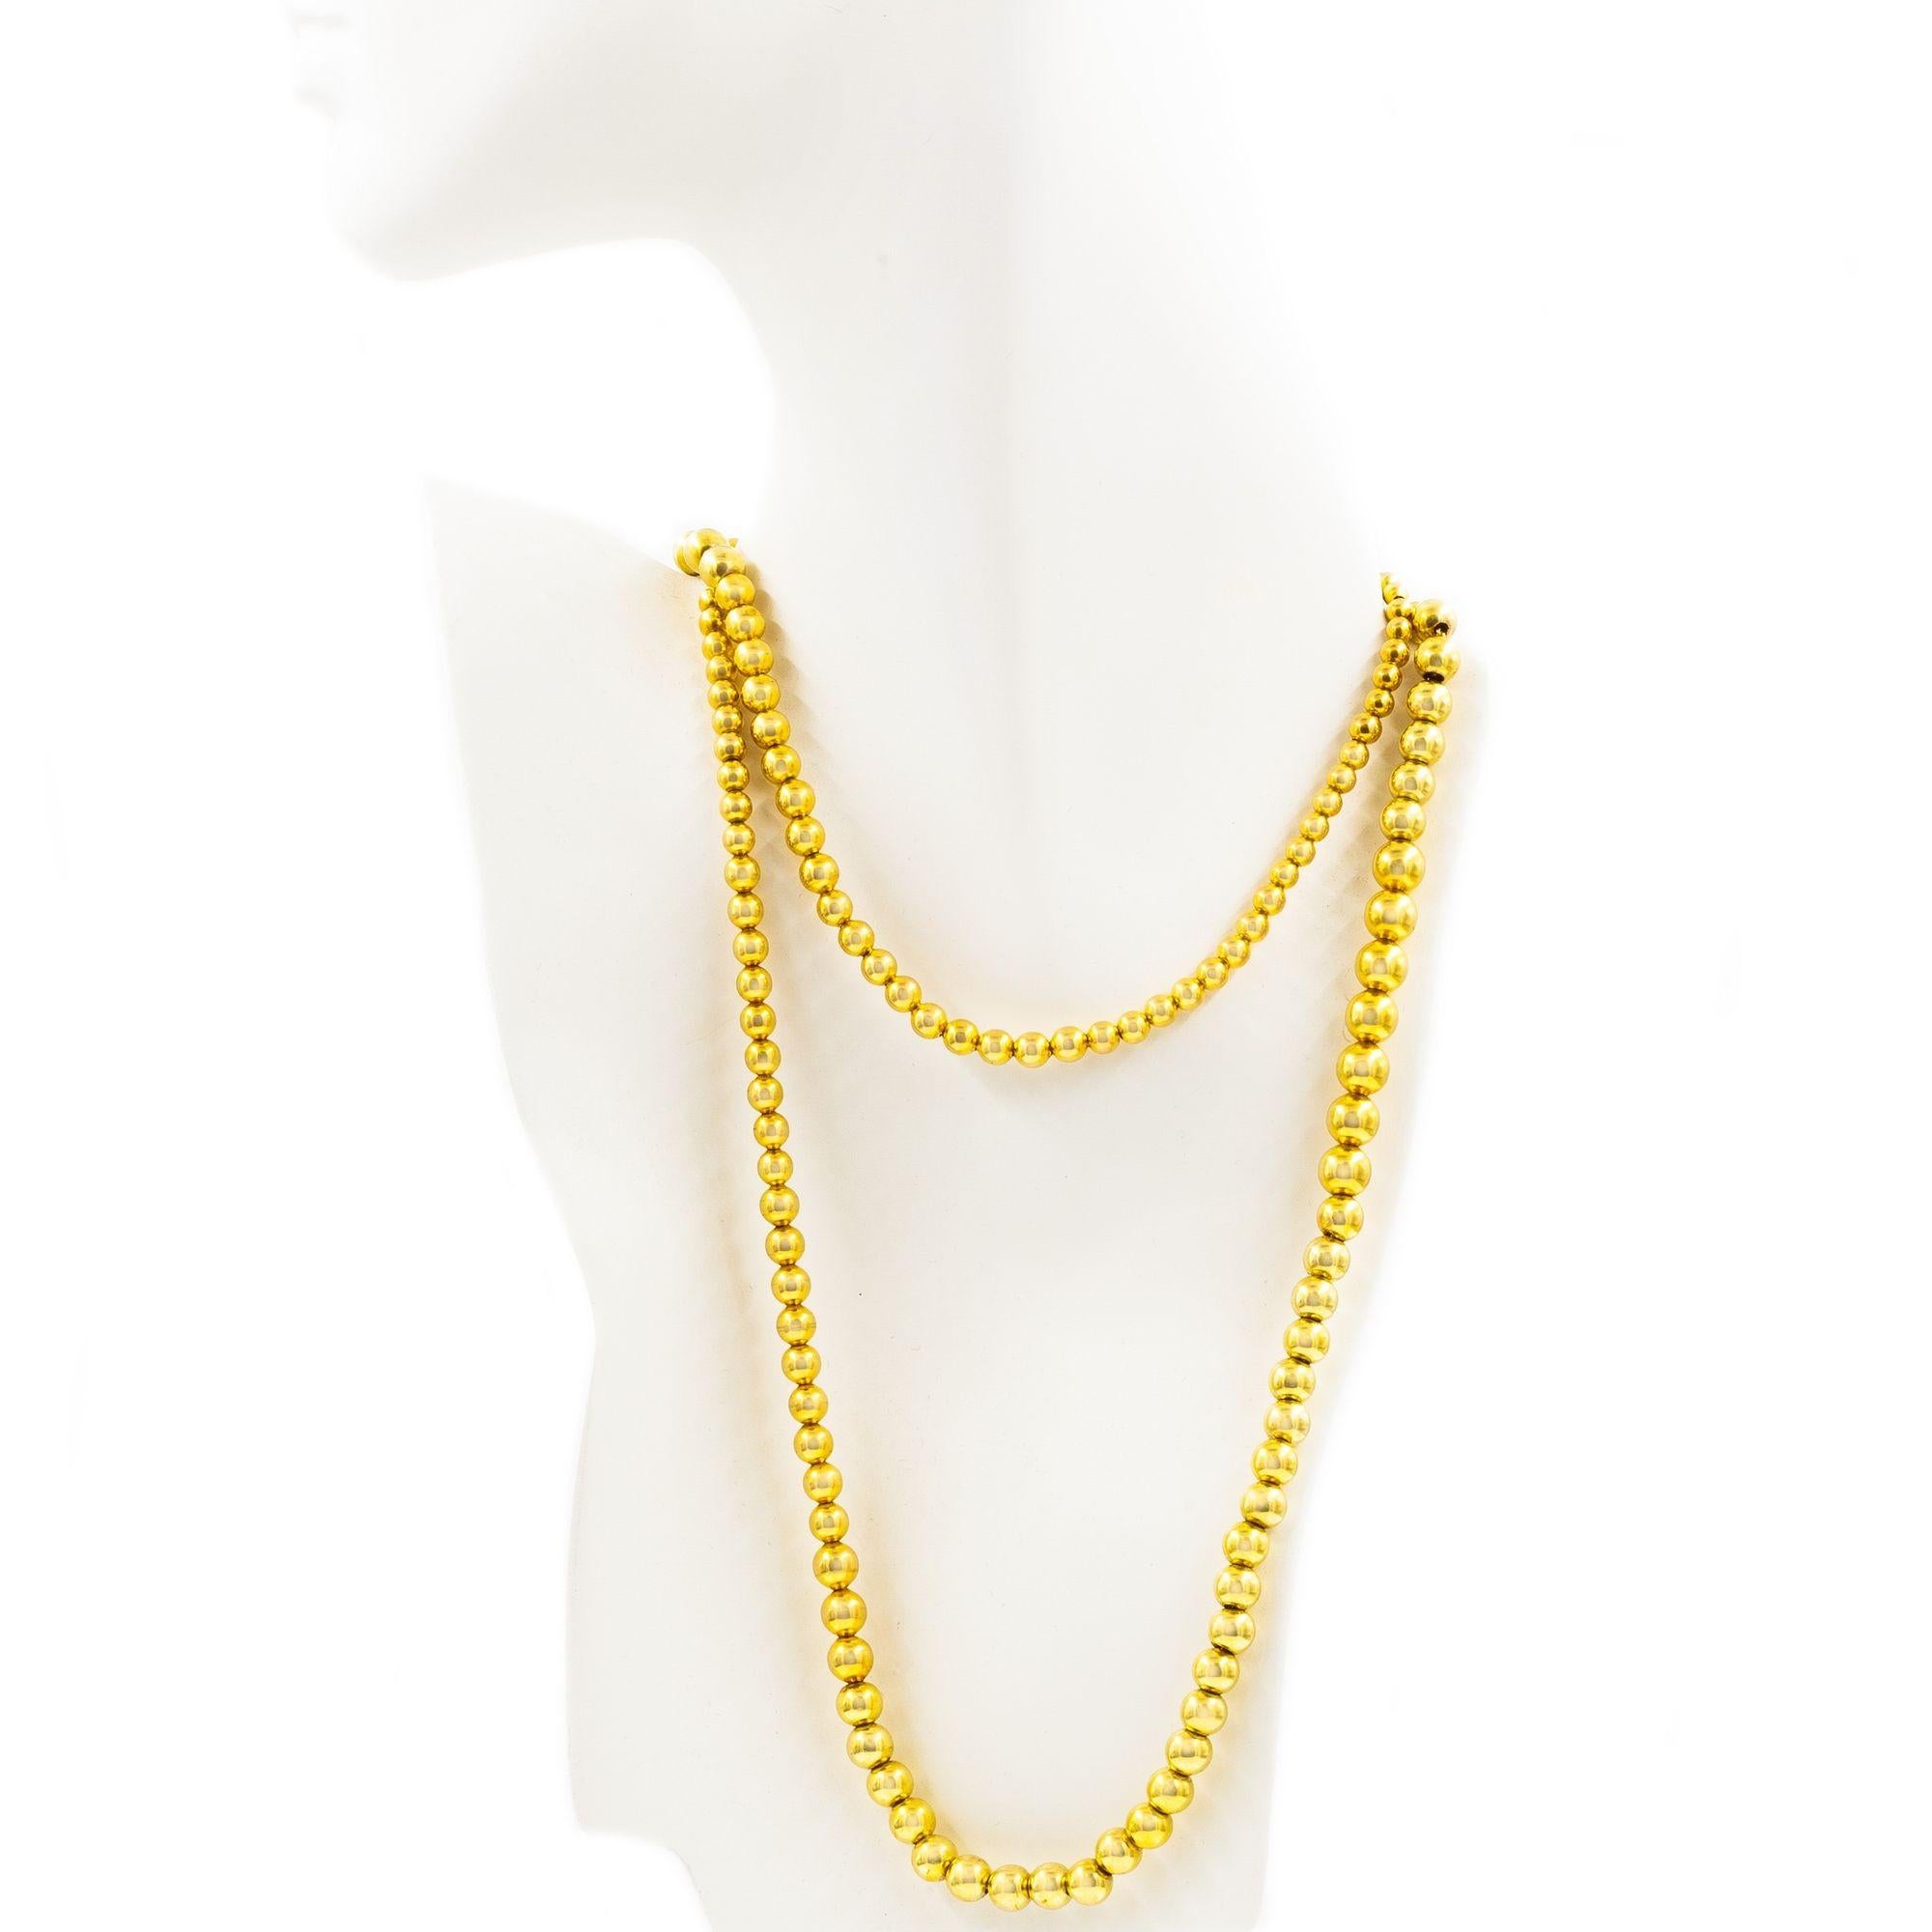 VINTAGE 14K GOLD GRADUATED BEAD NECKLACE
Item # C104271 

A super long and playful collection of graduated 14 karat yellow gold beads over an internal gold link chain. The length allows it to be worn either as a double-layered necklace or as one